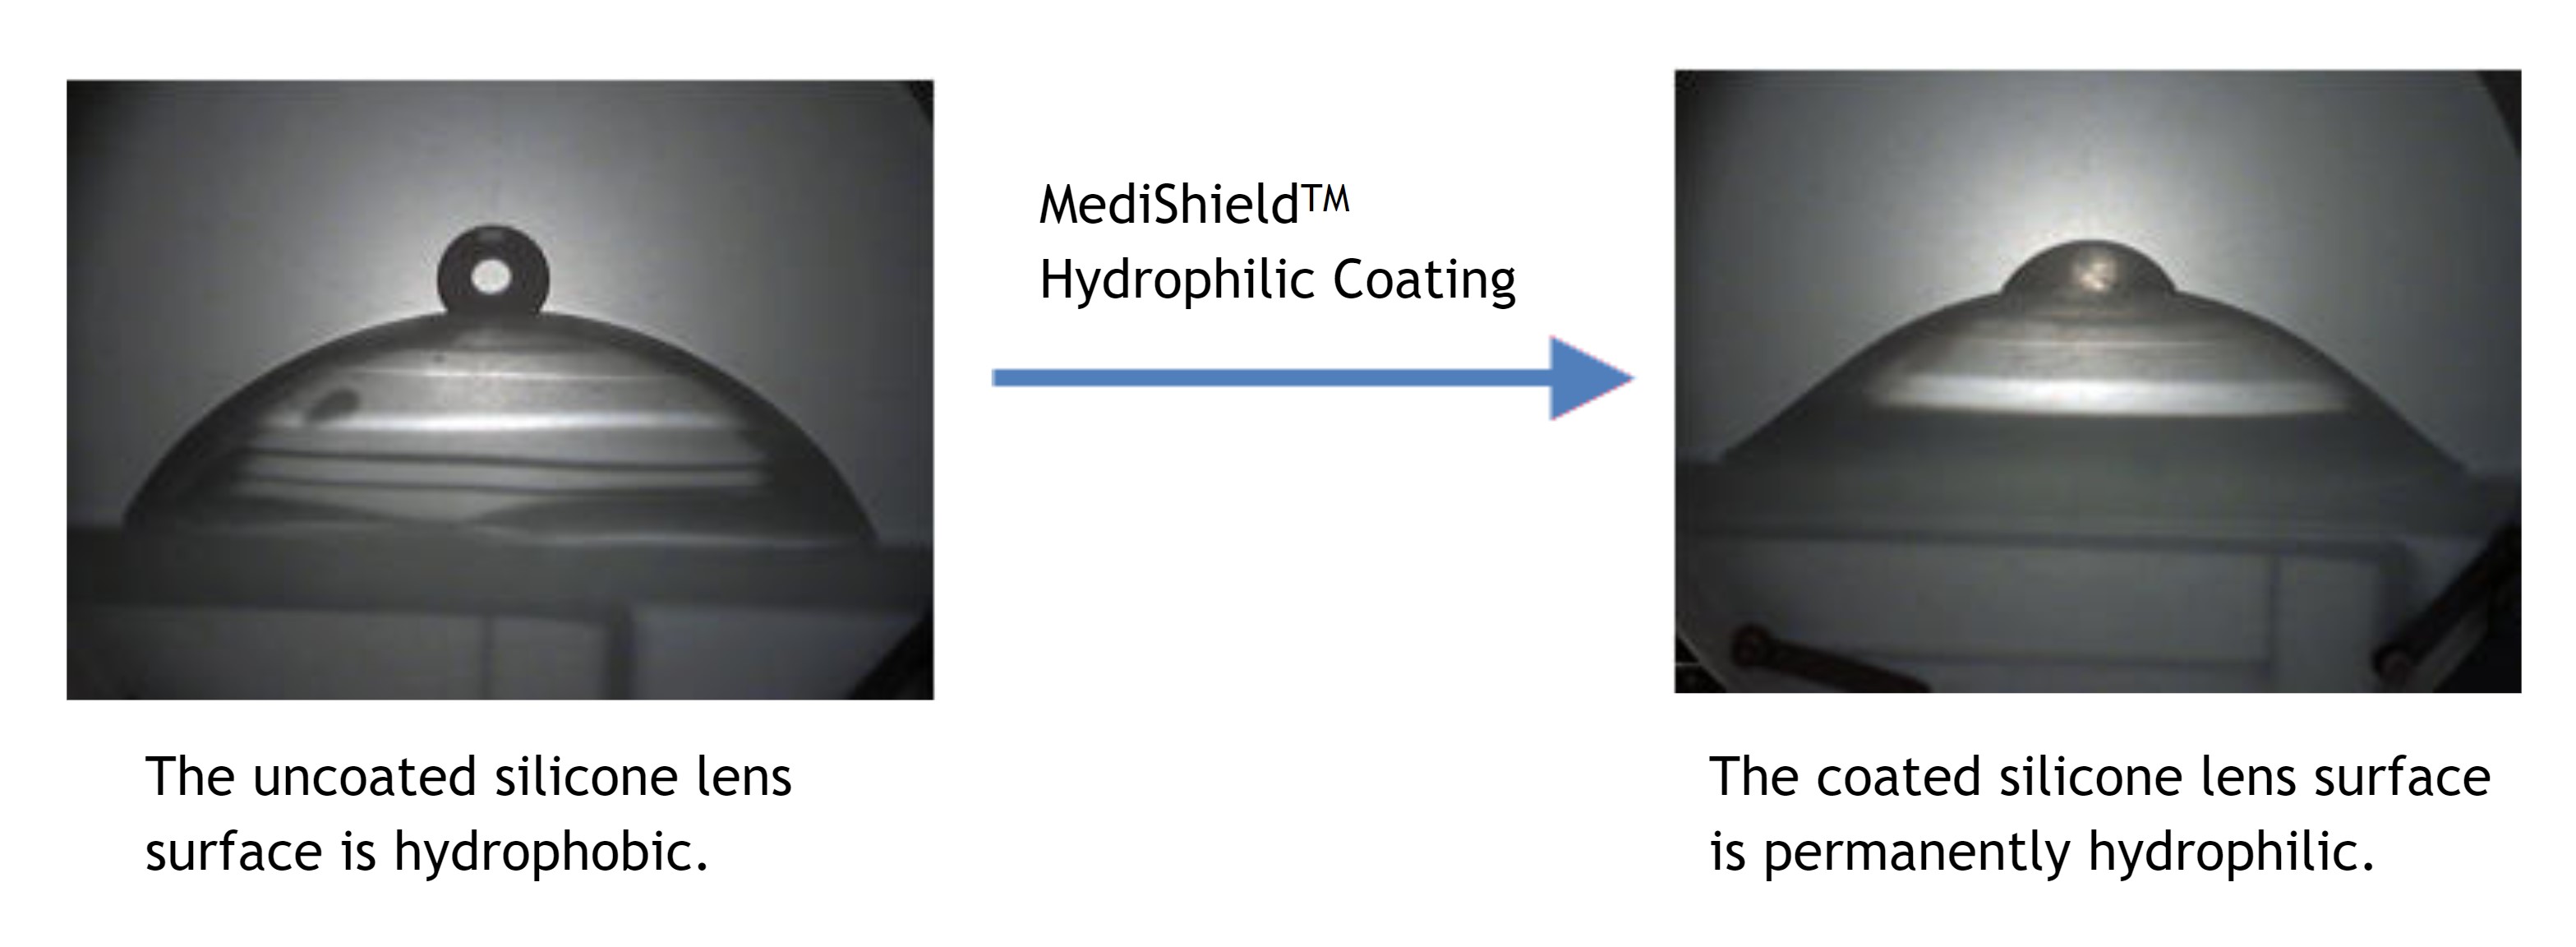 EziCleen – HYDROPHOBIC COATING FOR GLASS: WHAT IS IT AND HOW DOES IT WORK?